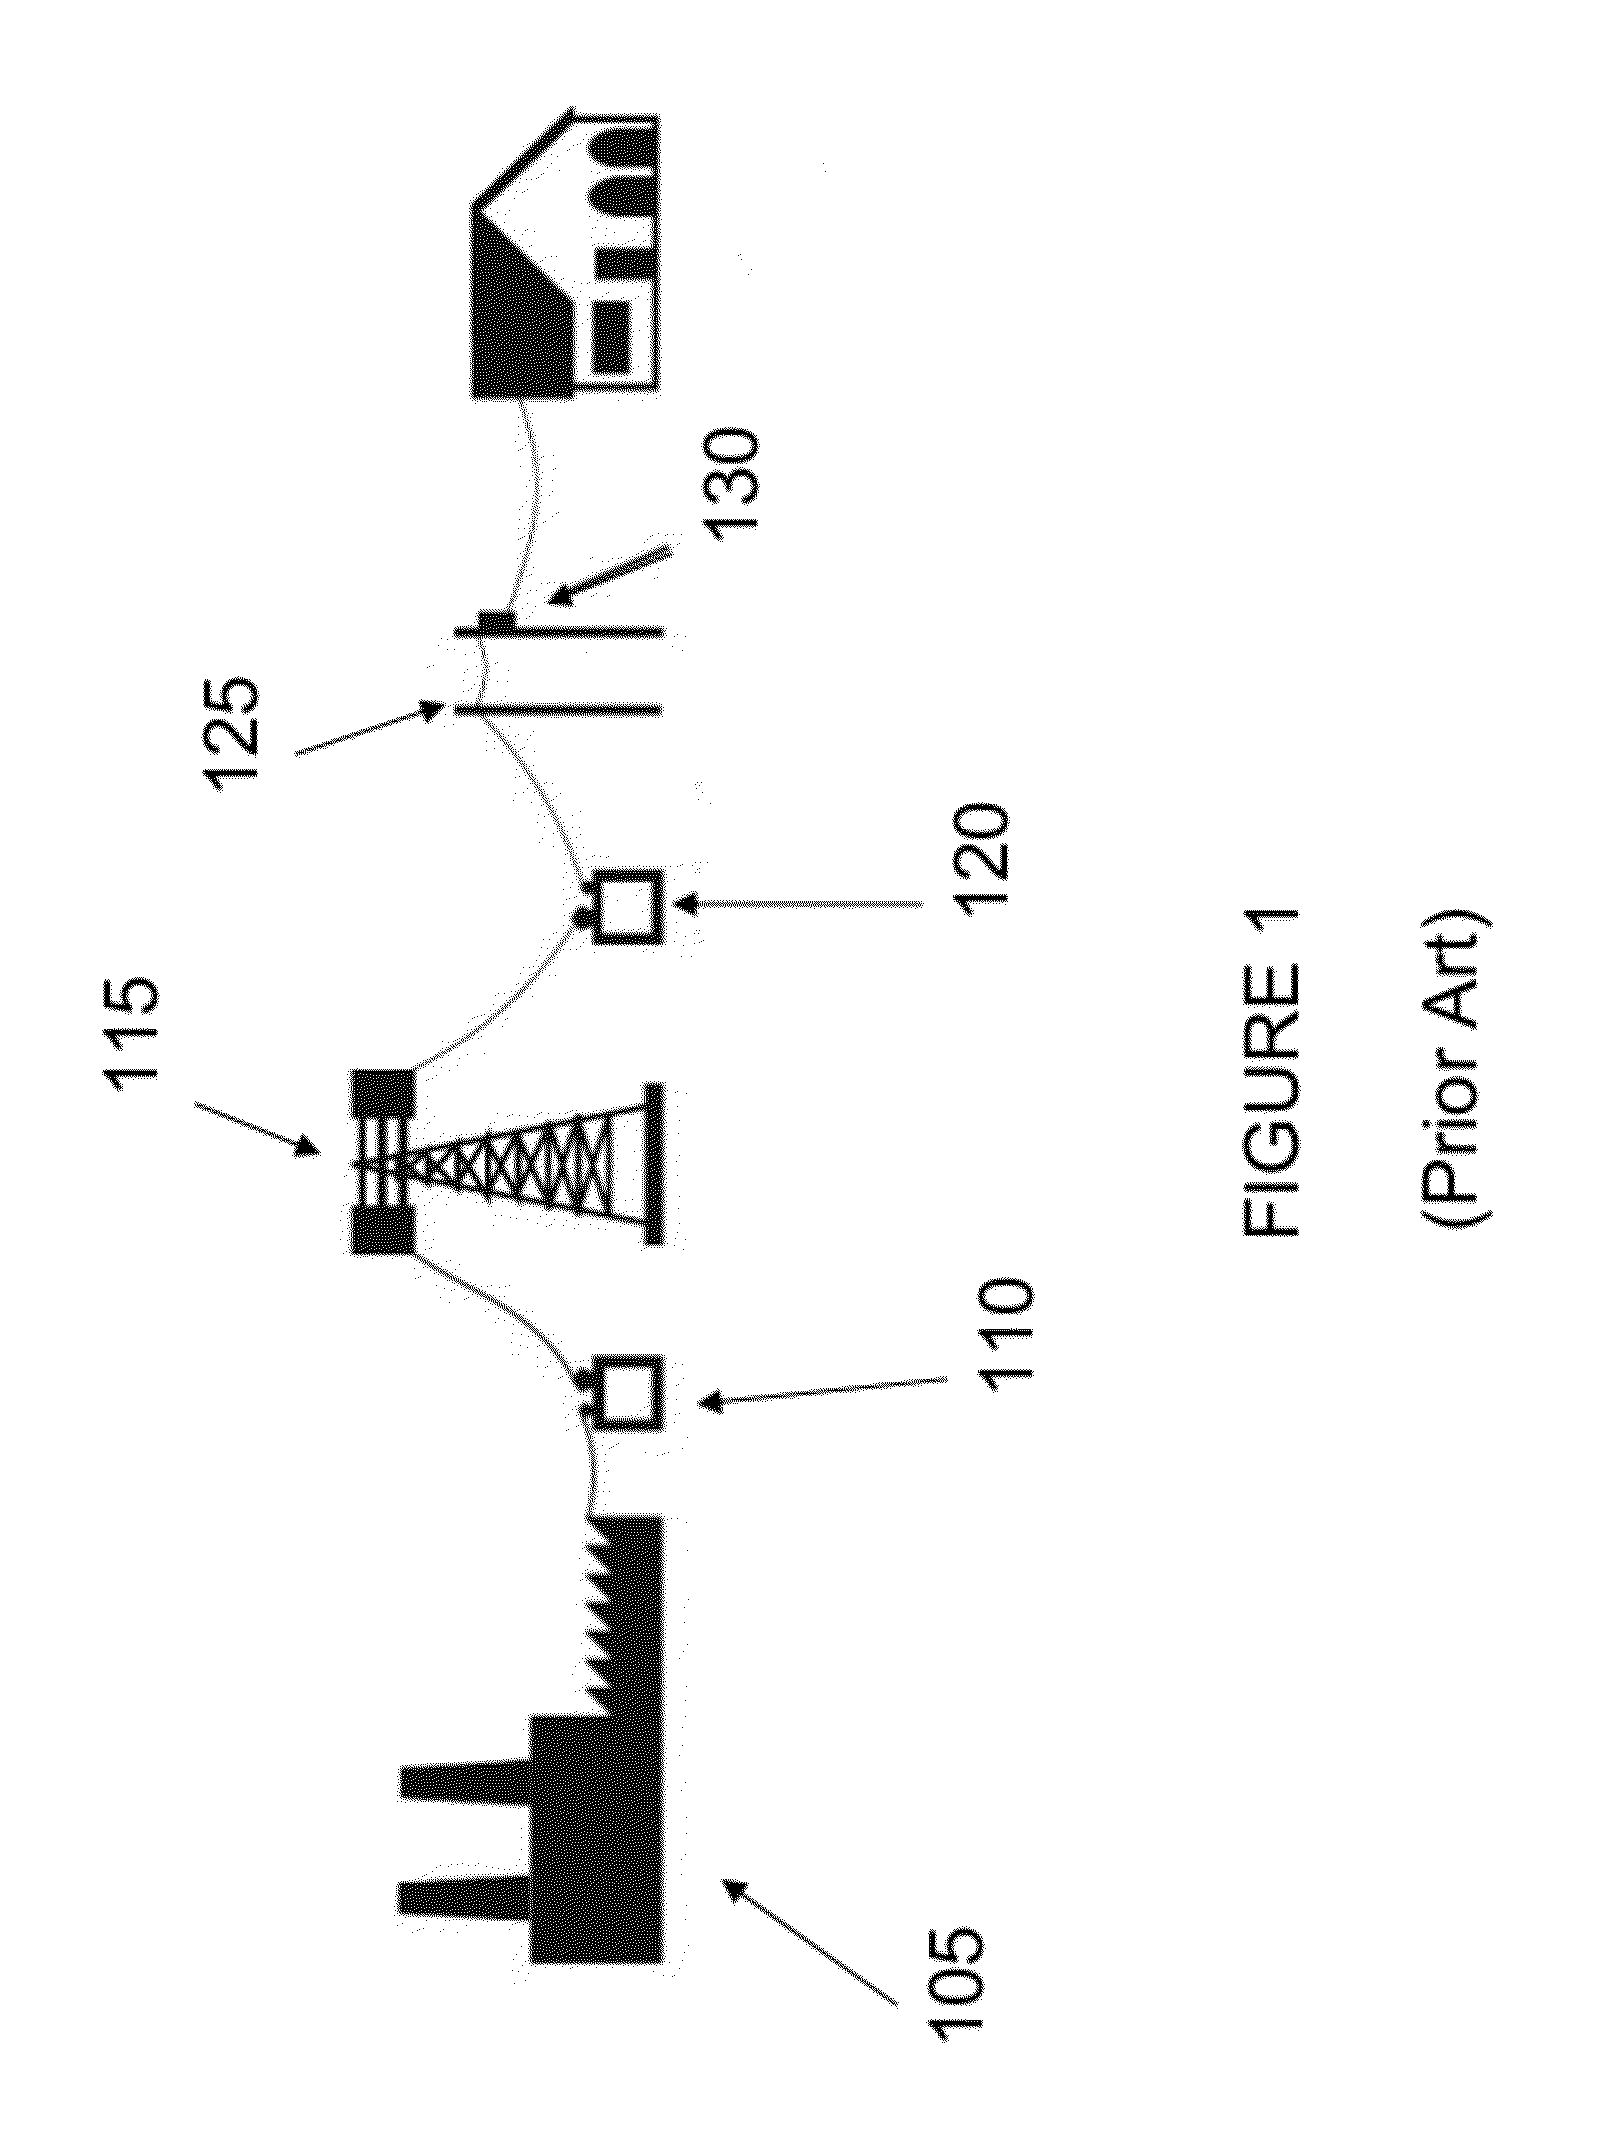 System and Method For Managing Load Distribution Across a Power Grid